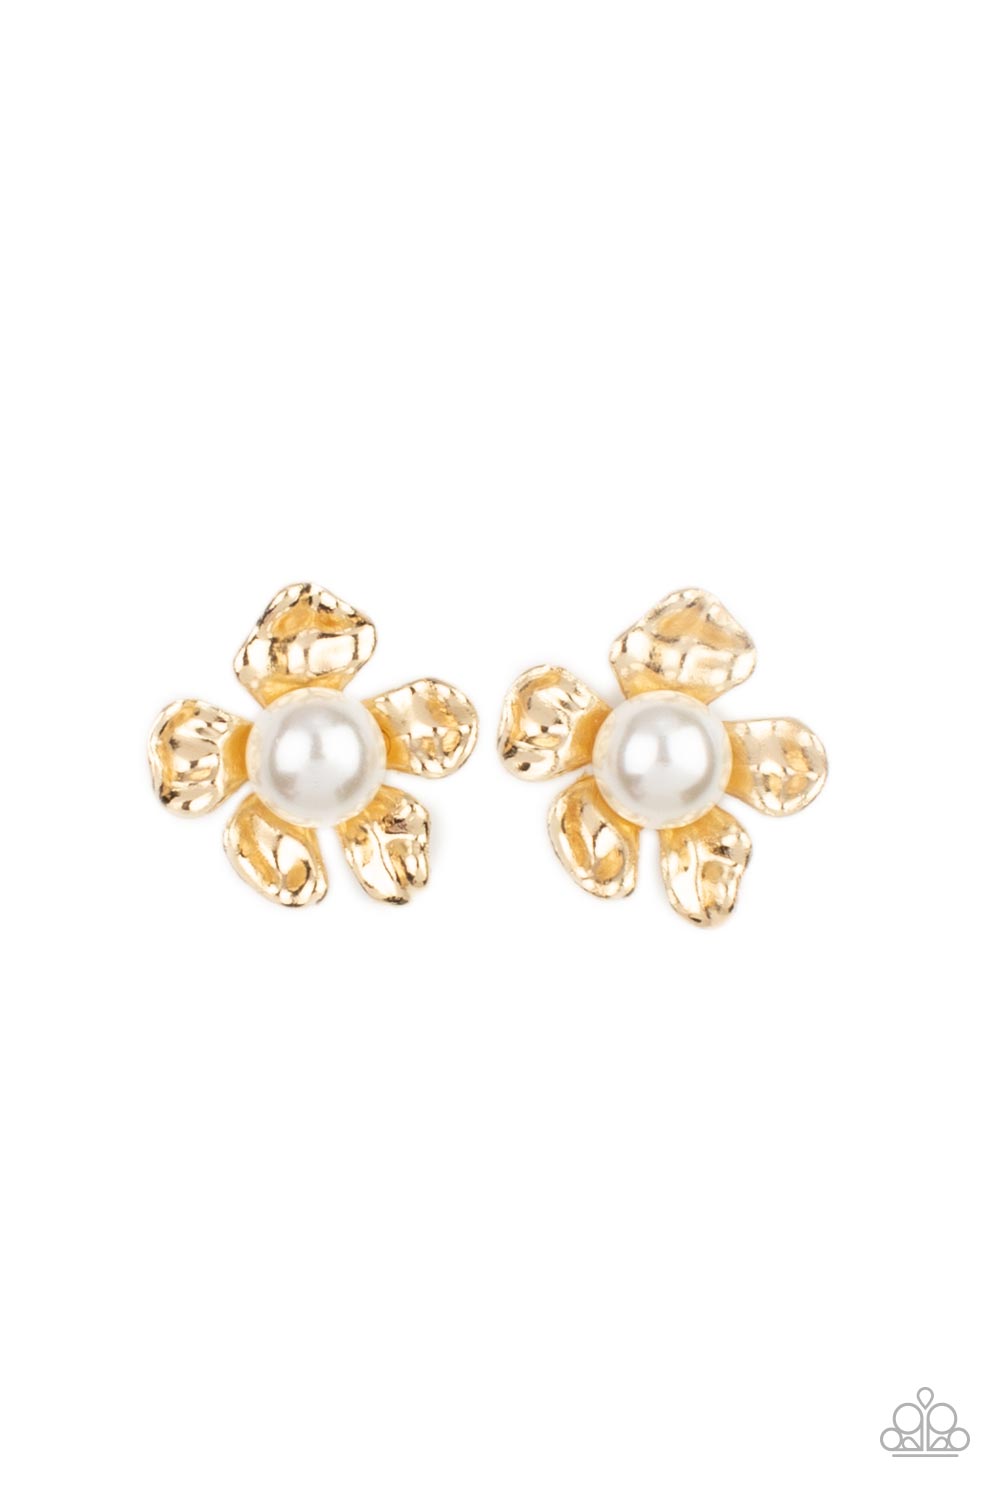 Paparazzi Earrings - Apple Blossom Pearls - Gold